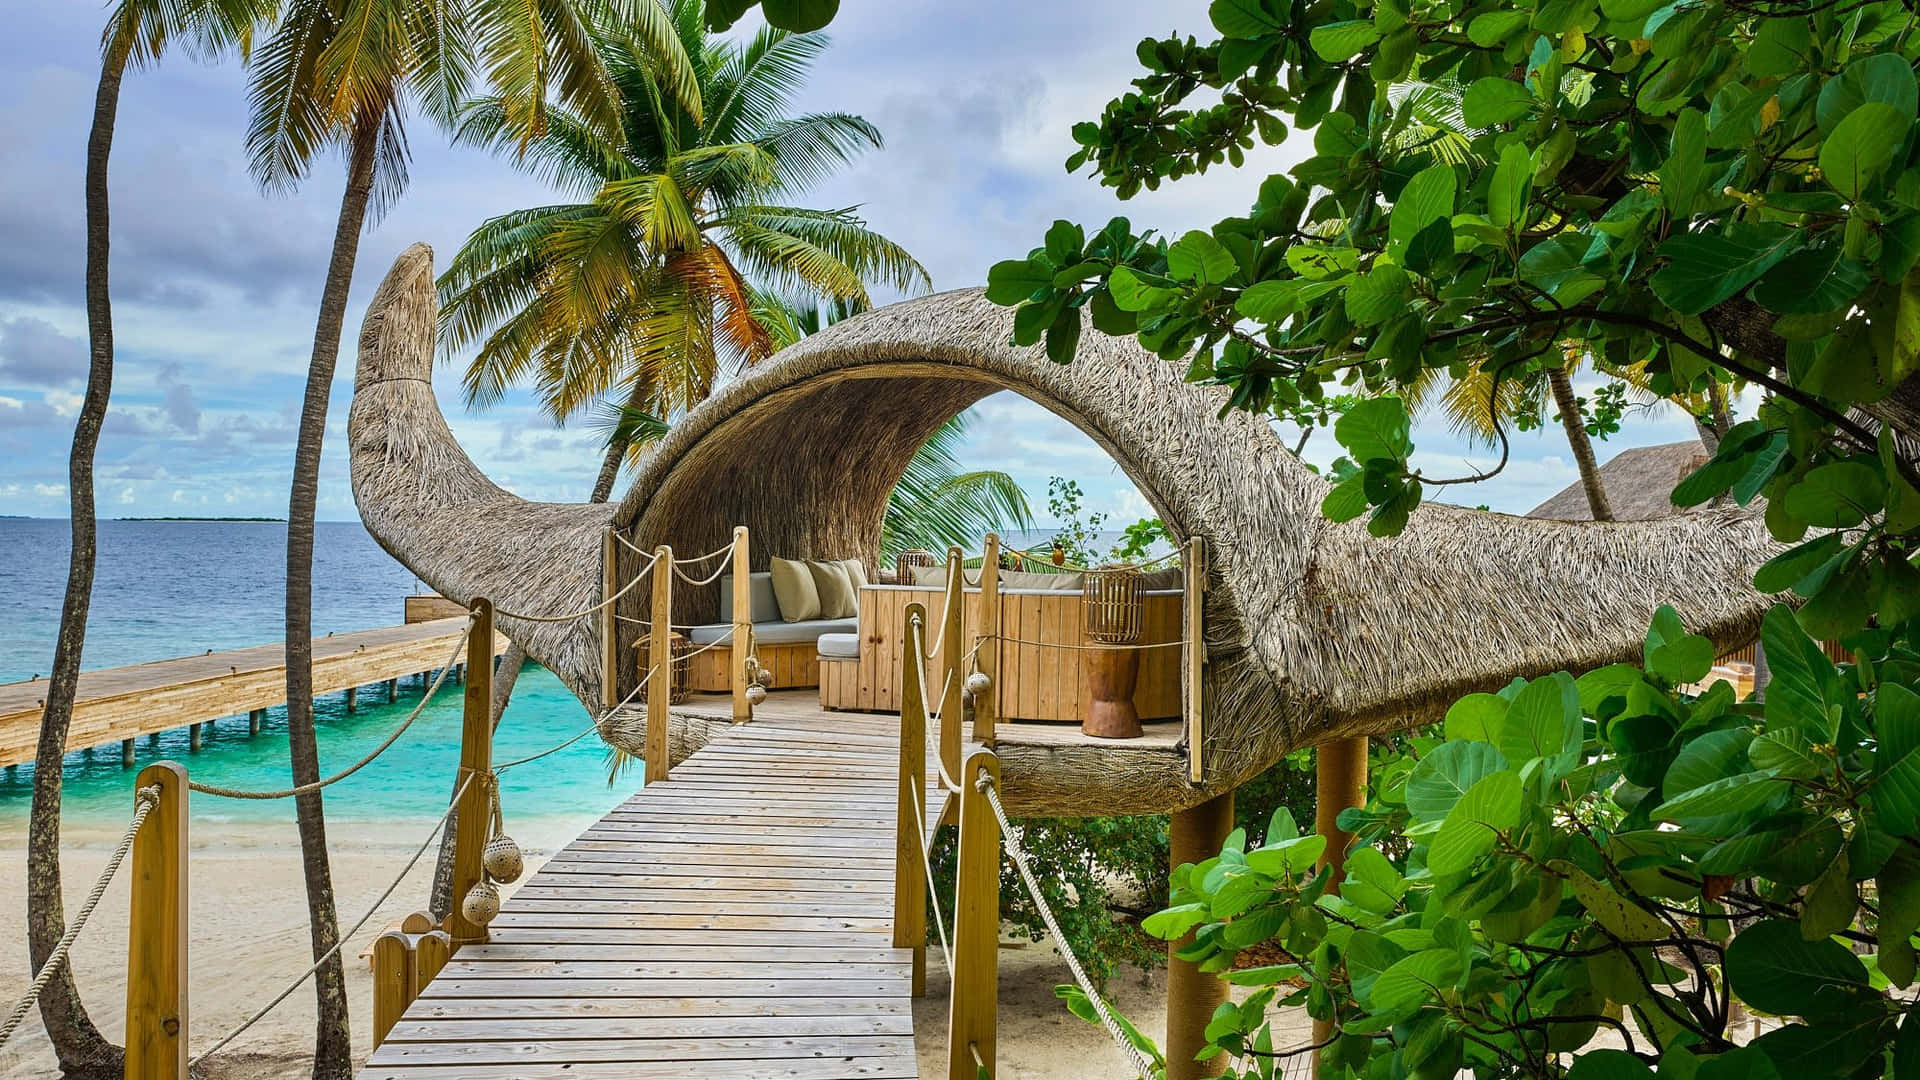 A Wooden Walkway Leading To A Tree House On The Beach